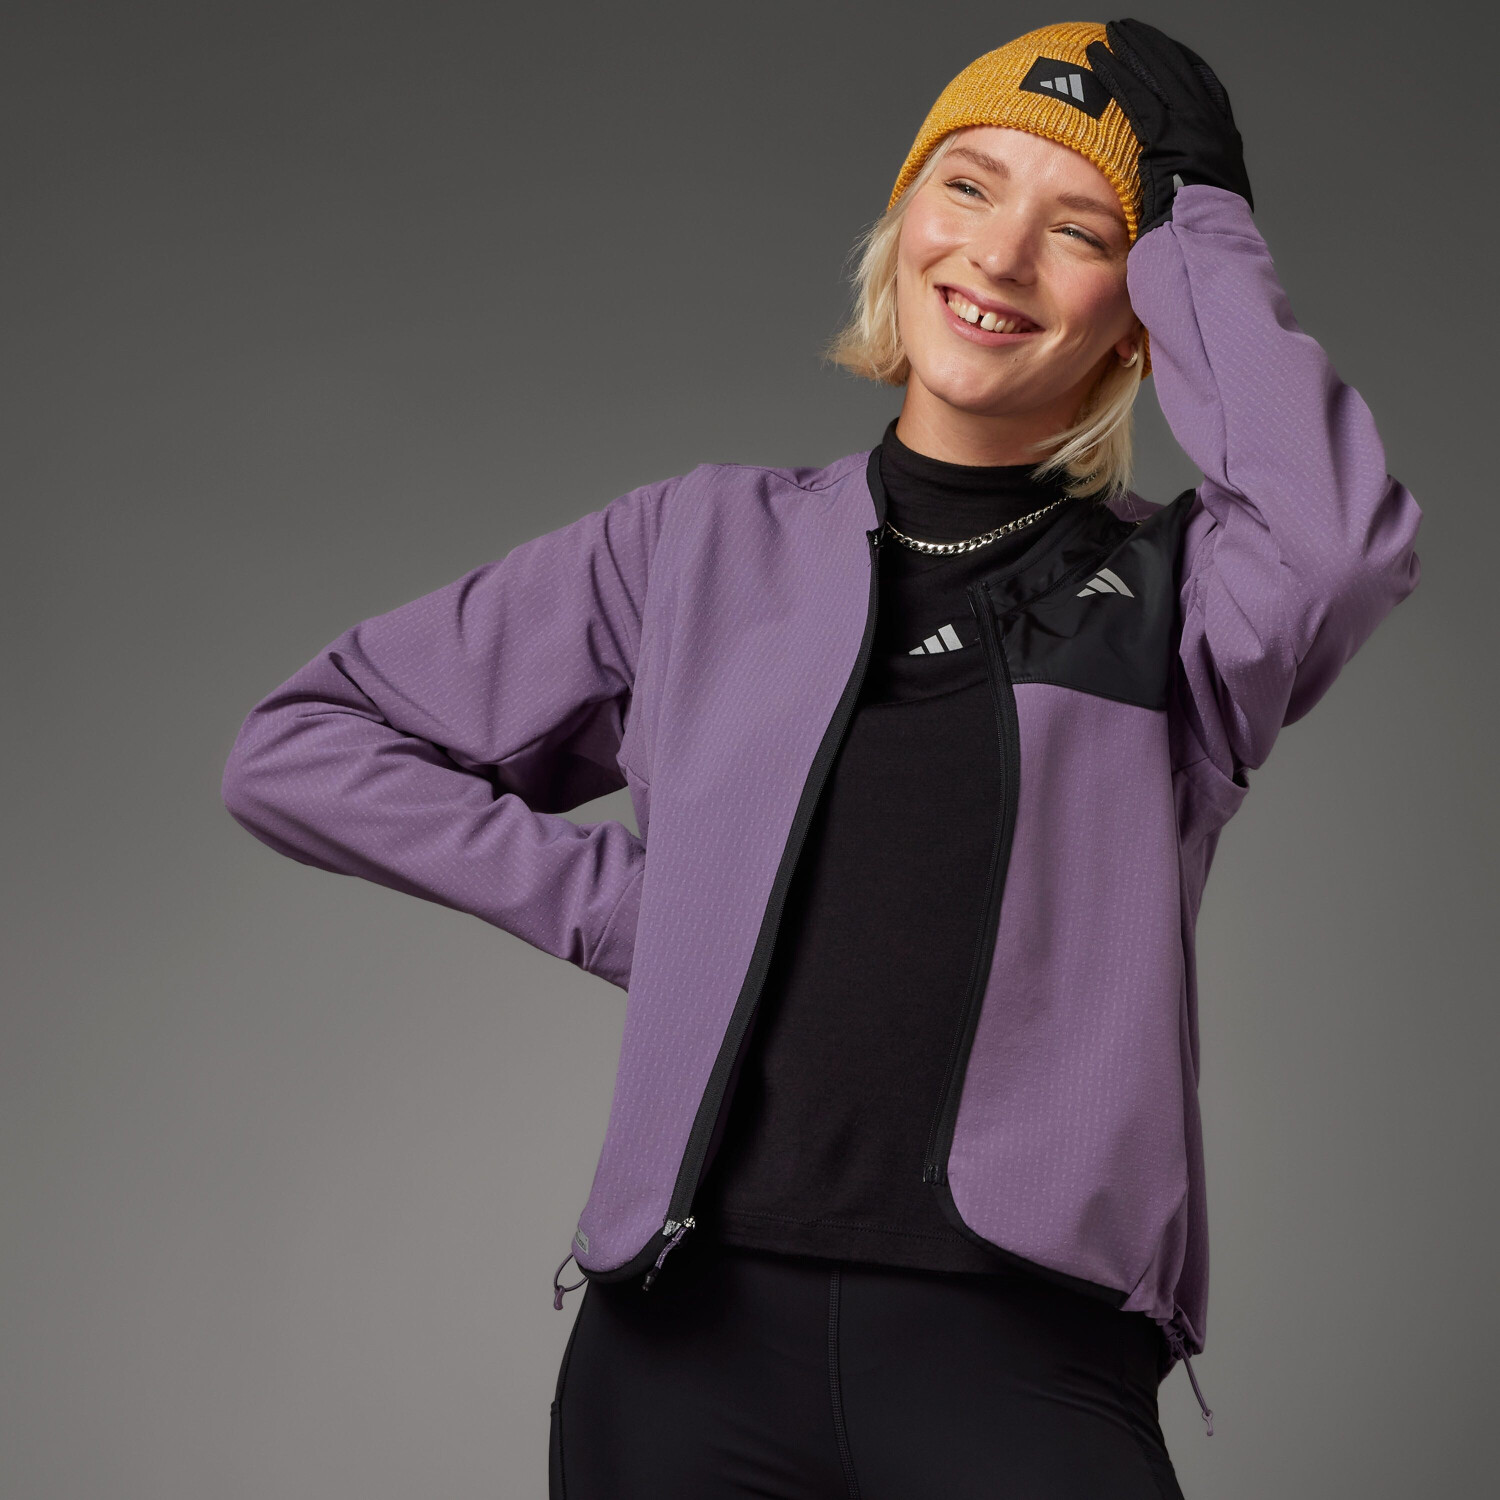 Conquer Running 69,99 € Elements Adidas Preisvergleich | bei COLD.RDY Ultimate Jacket shadow the (IM1916) violet Running ab